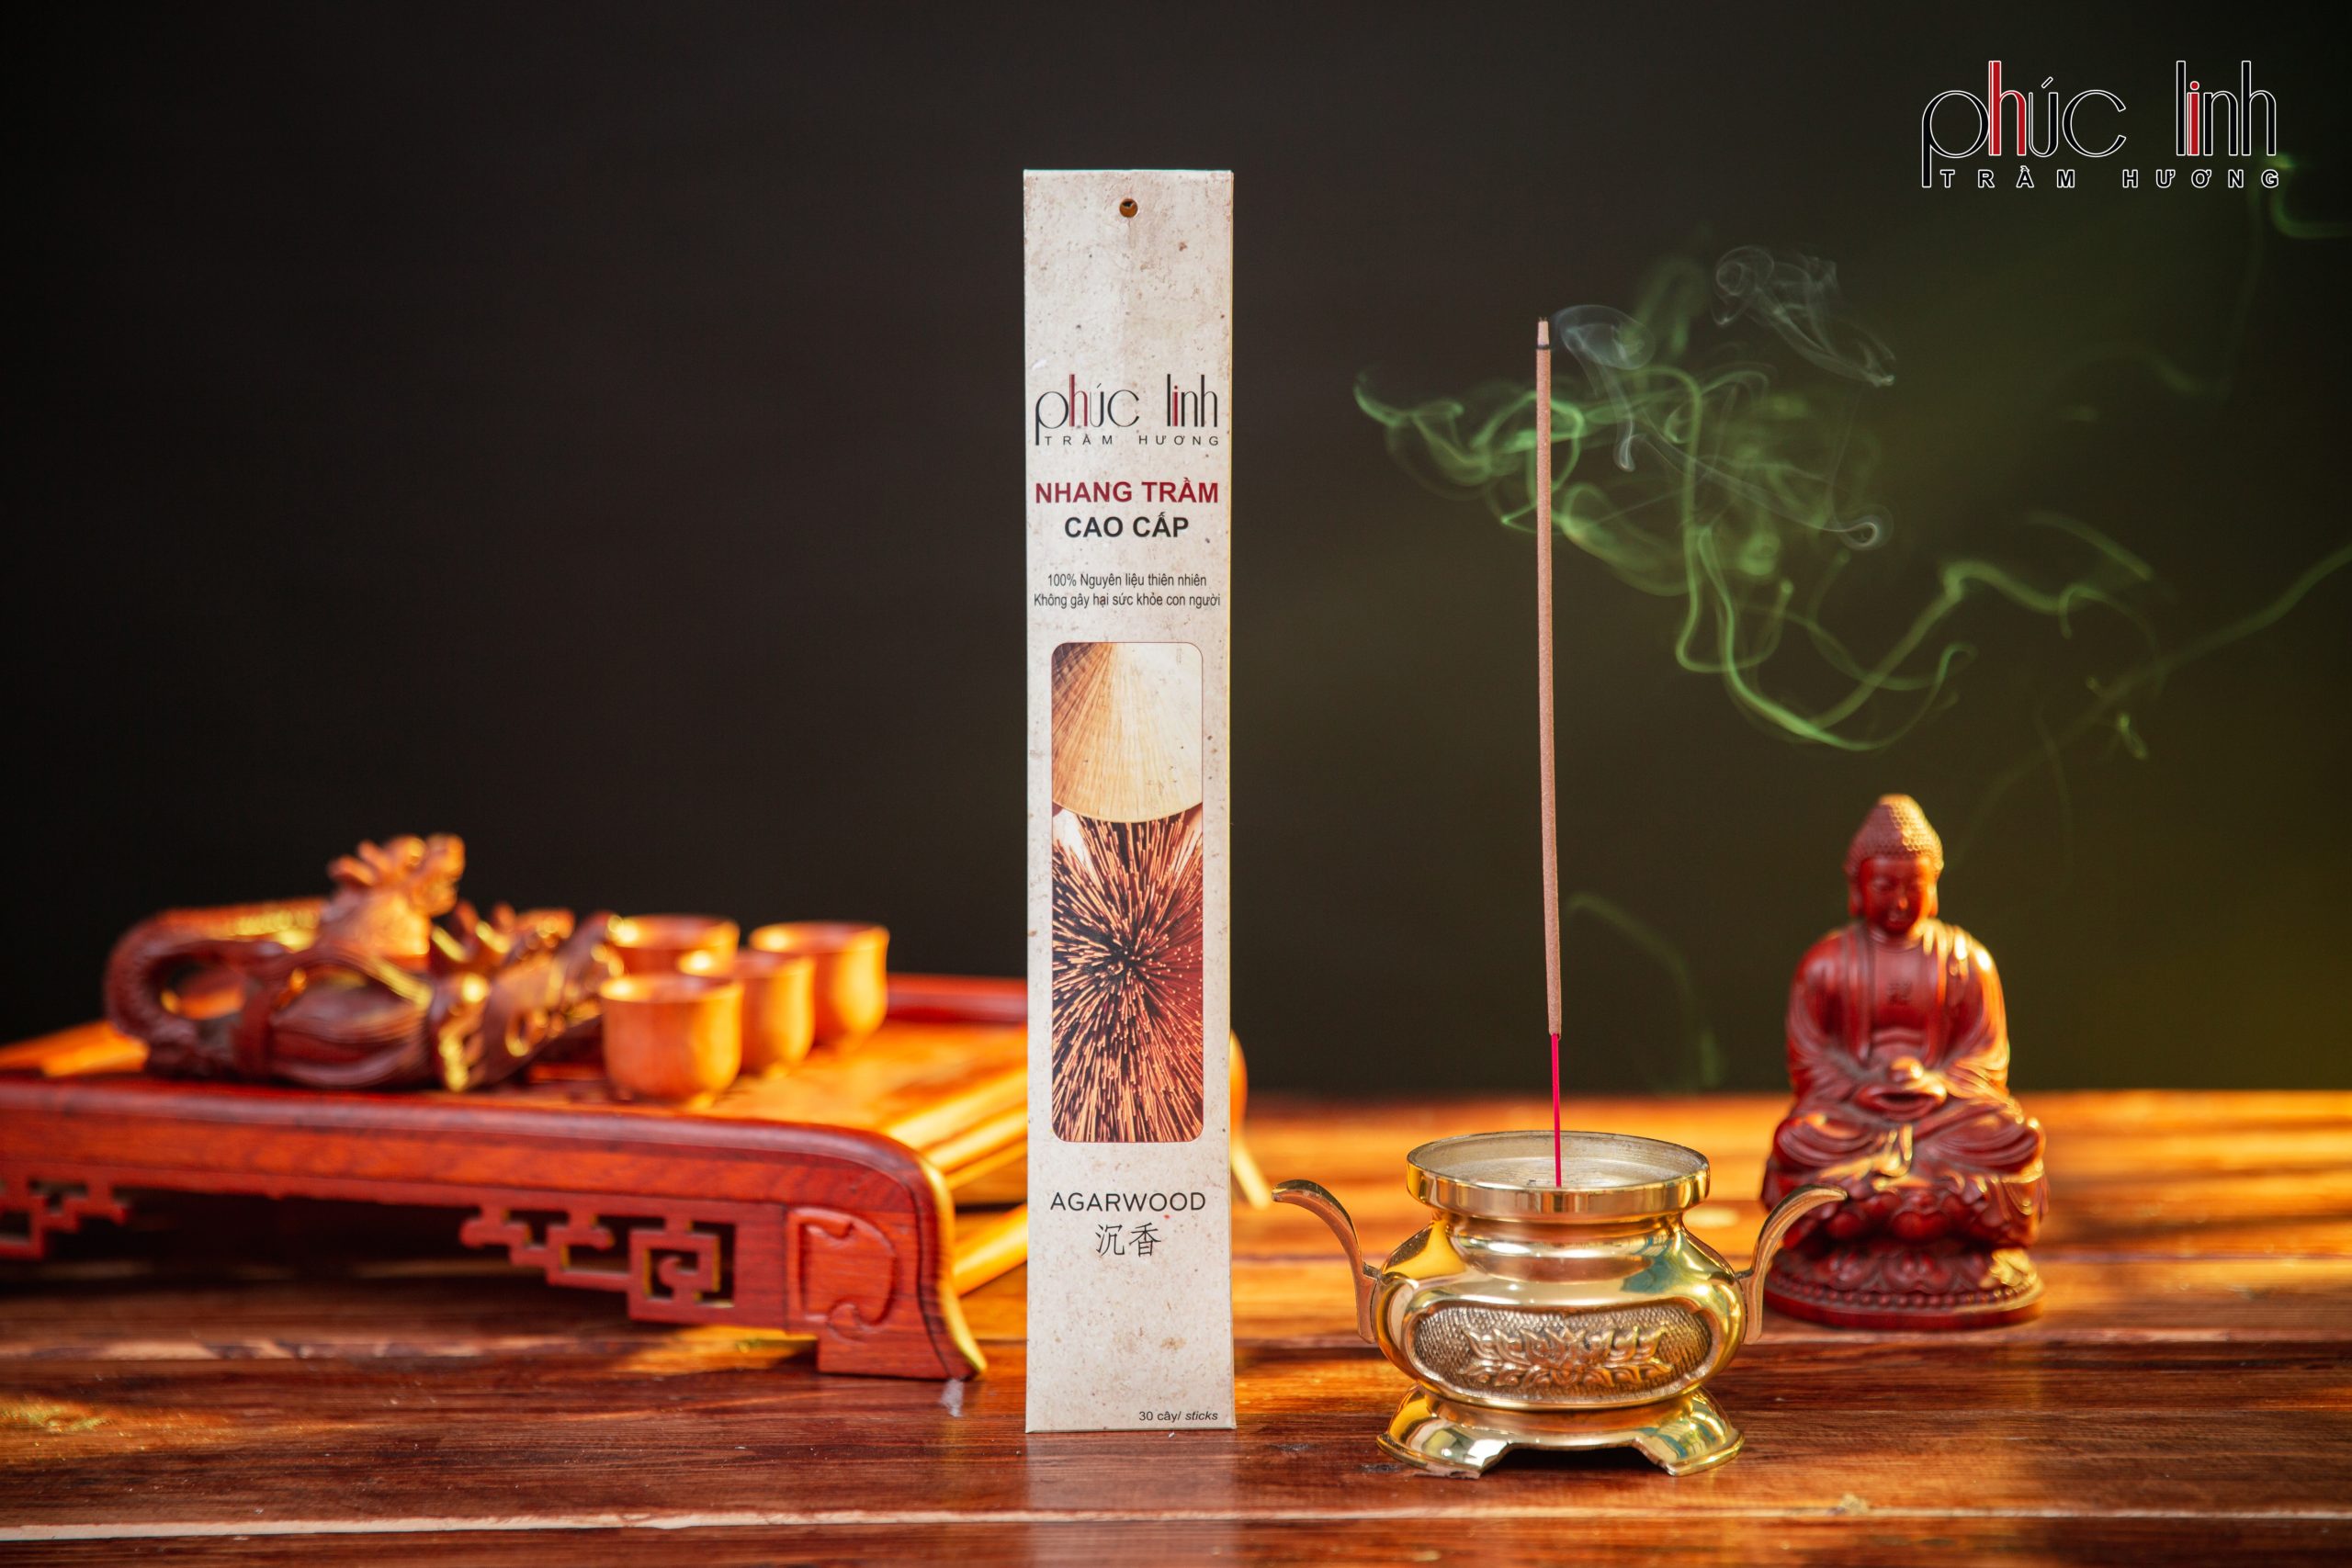 There Is A Trend Used In Today'S Life Because Of Its Assurance For Health As Well As The Benefits Of Agarwood Incense